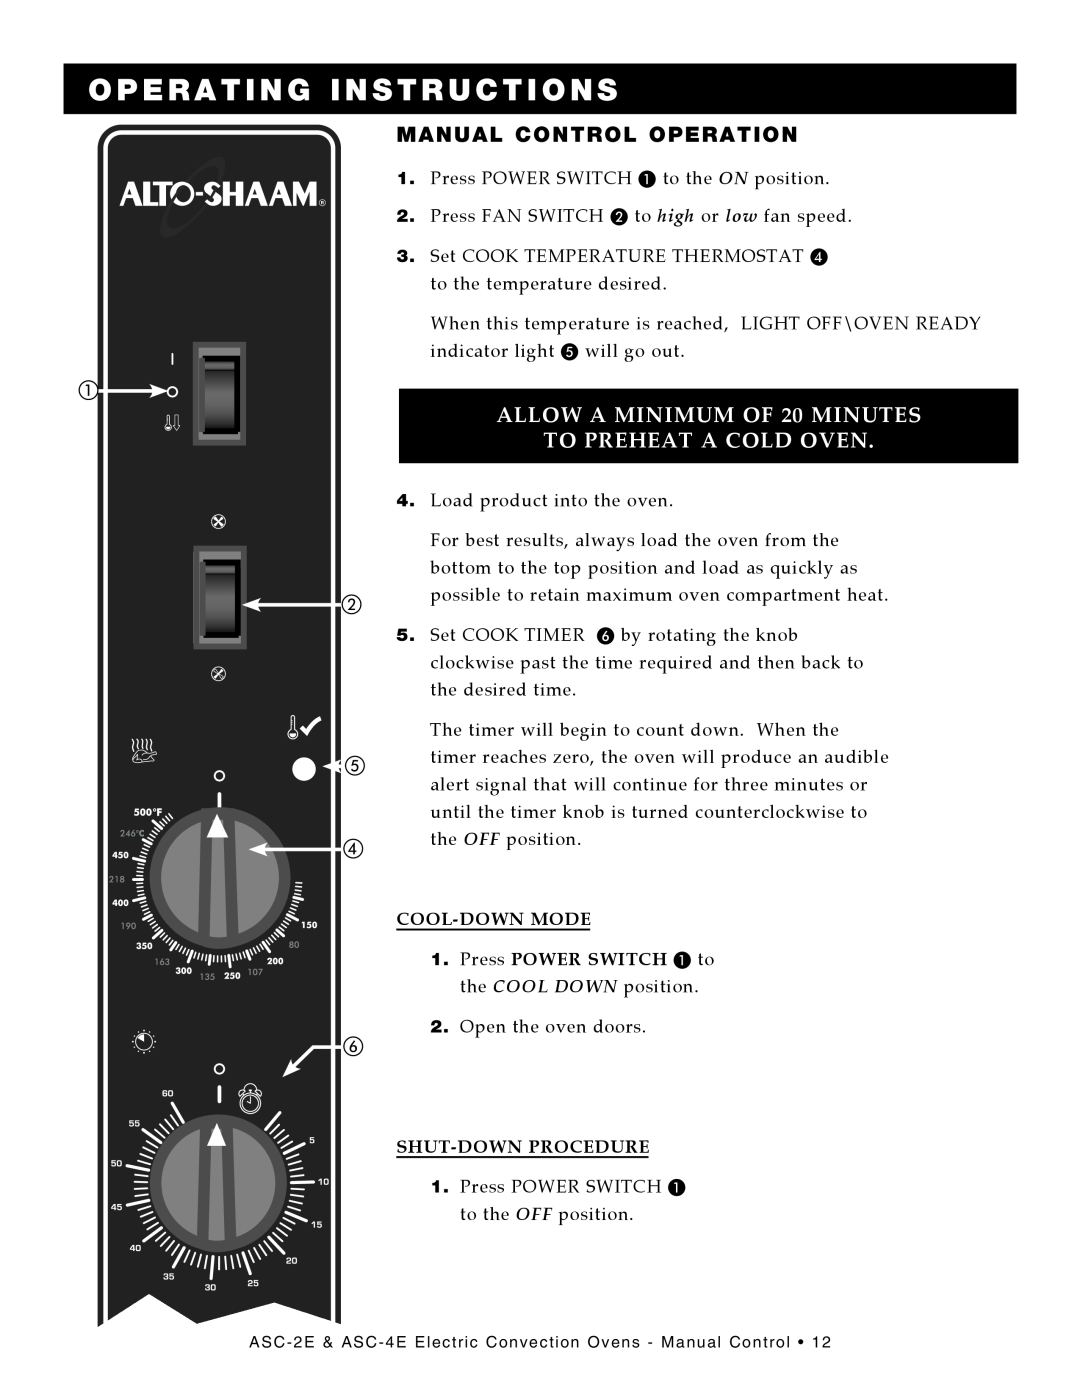 Alto-Shaam Convection Oven Manual Control Operation, Operating Instructions, ALLOW A MINIMUM OF 20 MINUTES, Cool-Downmode 